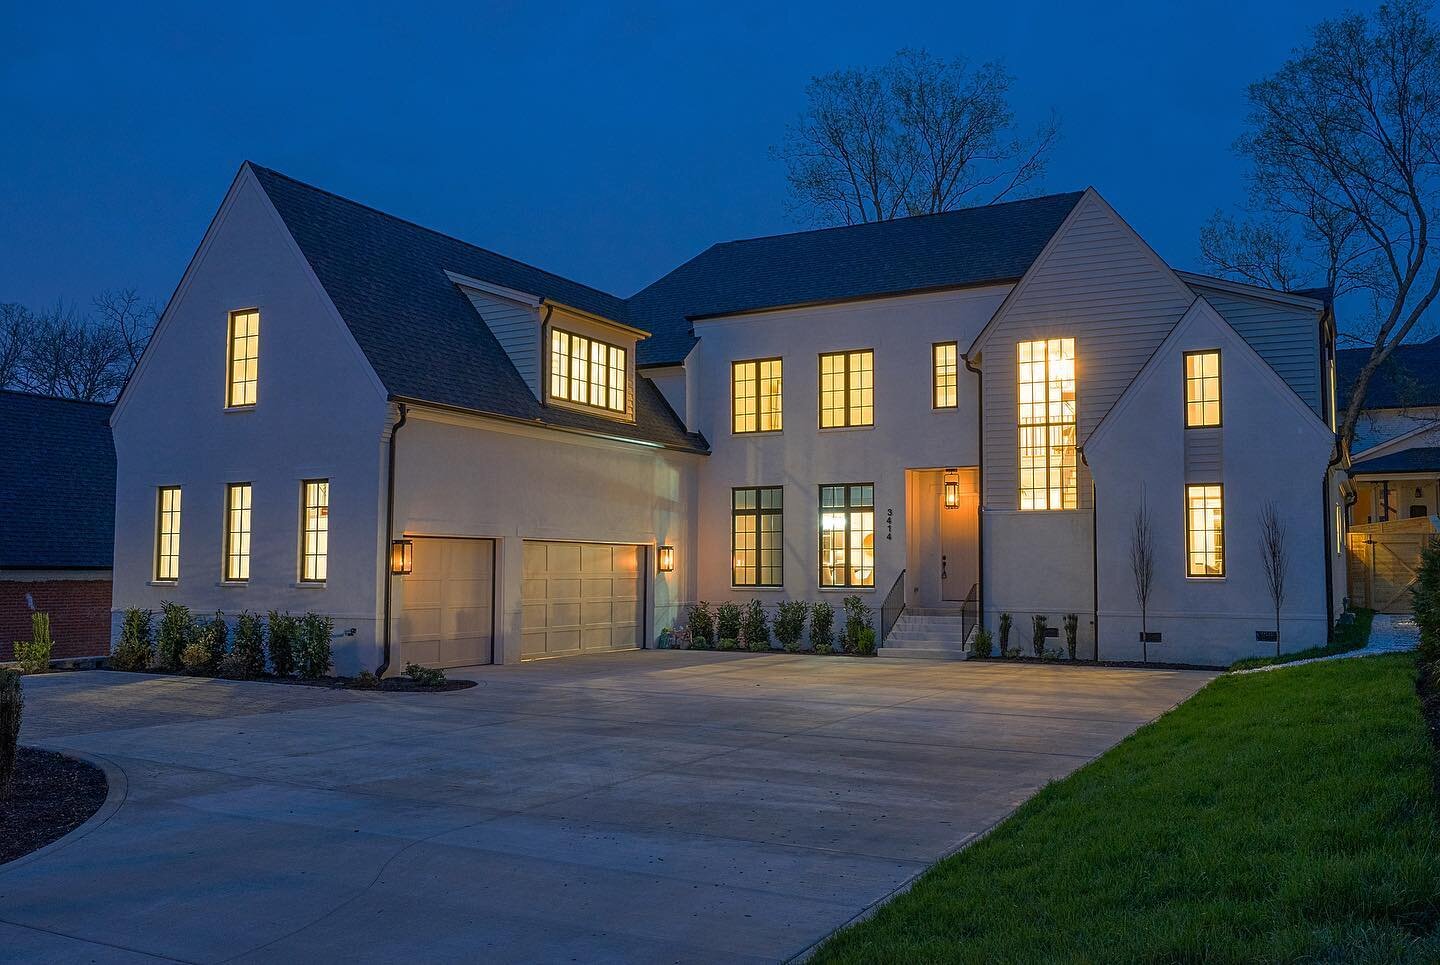 A great twilight shot of one of our beautiful Golf Club homes😍
&bull;
&bull;
&bull;

#newconstruction #nashvillerealestate #nashvillehomes #nashvillehomesforsale #nashvilleliving #homeinspo #luxuryhomes #homedesign #luxuryrealestate #luxurylifestyle